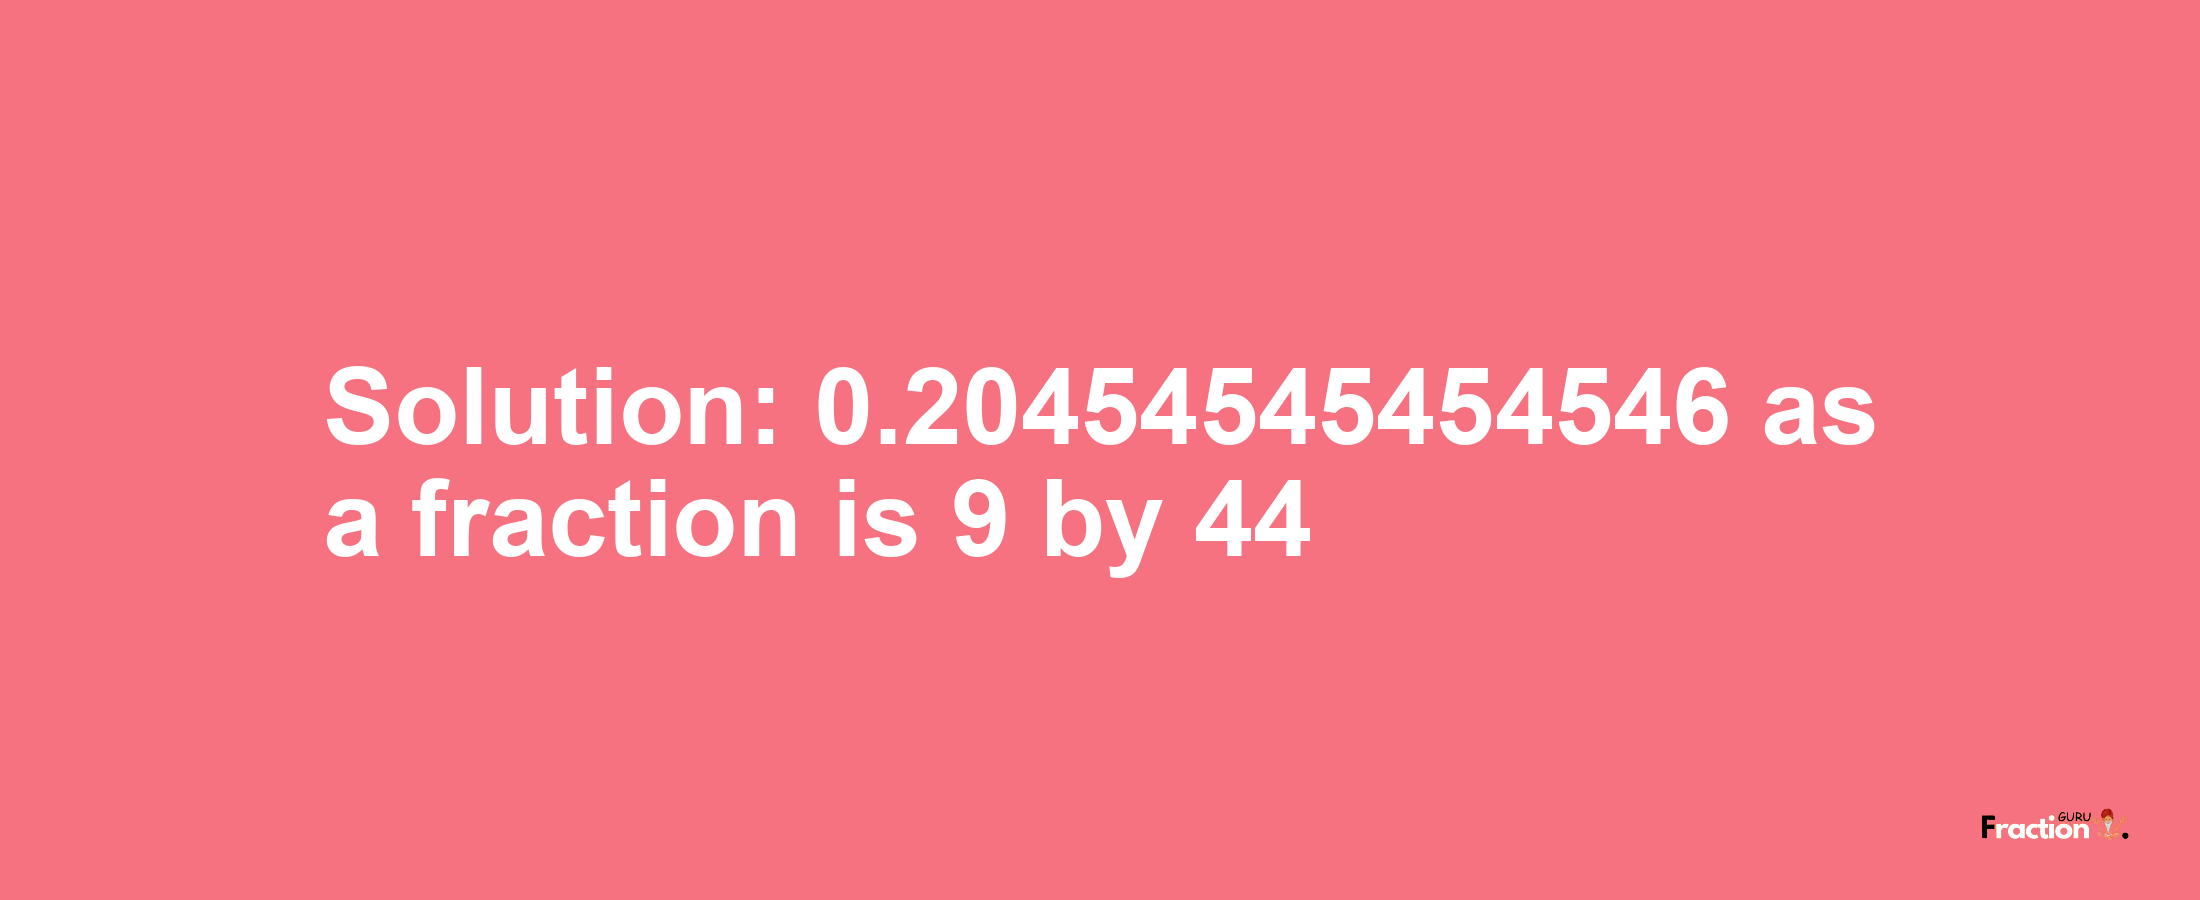 Solution:0.20454545454546 as a fraction is 9/44